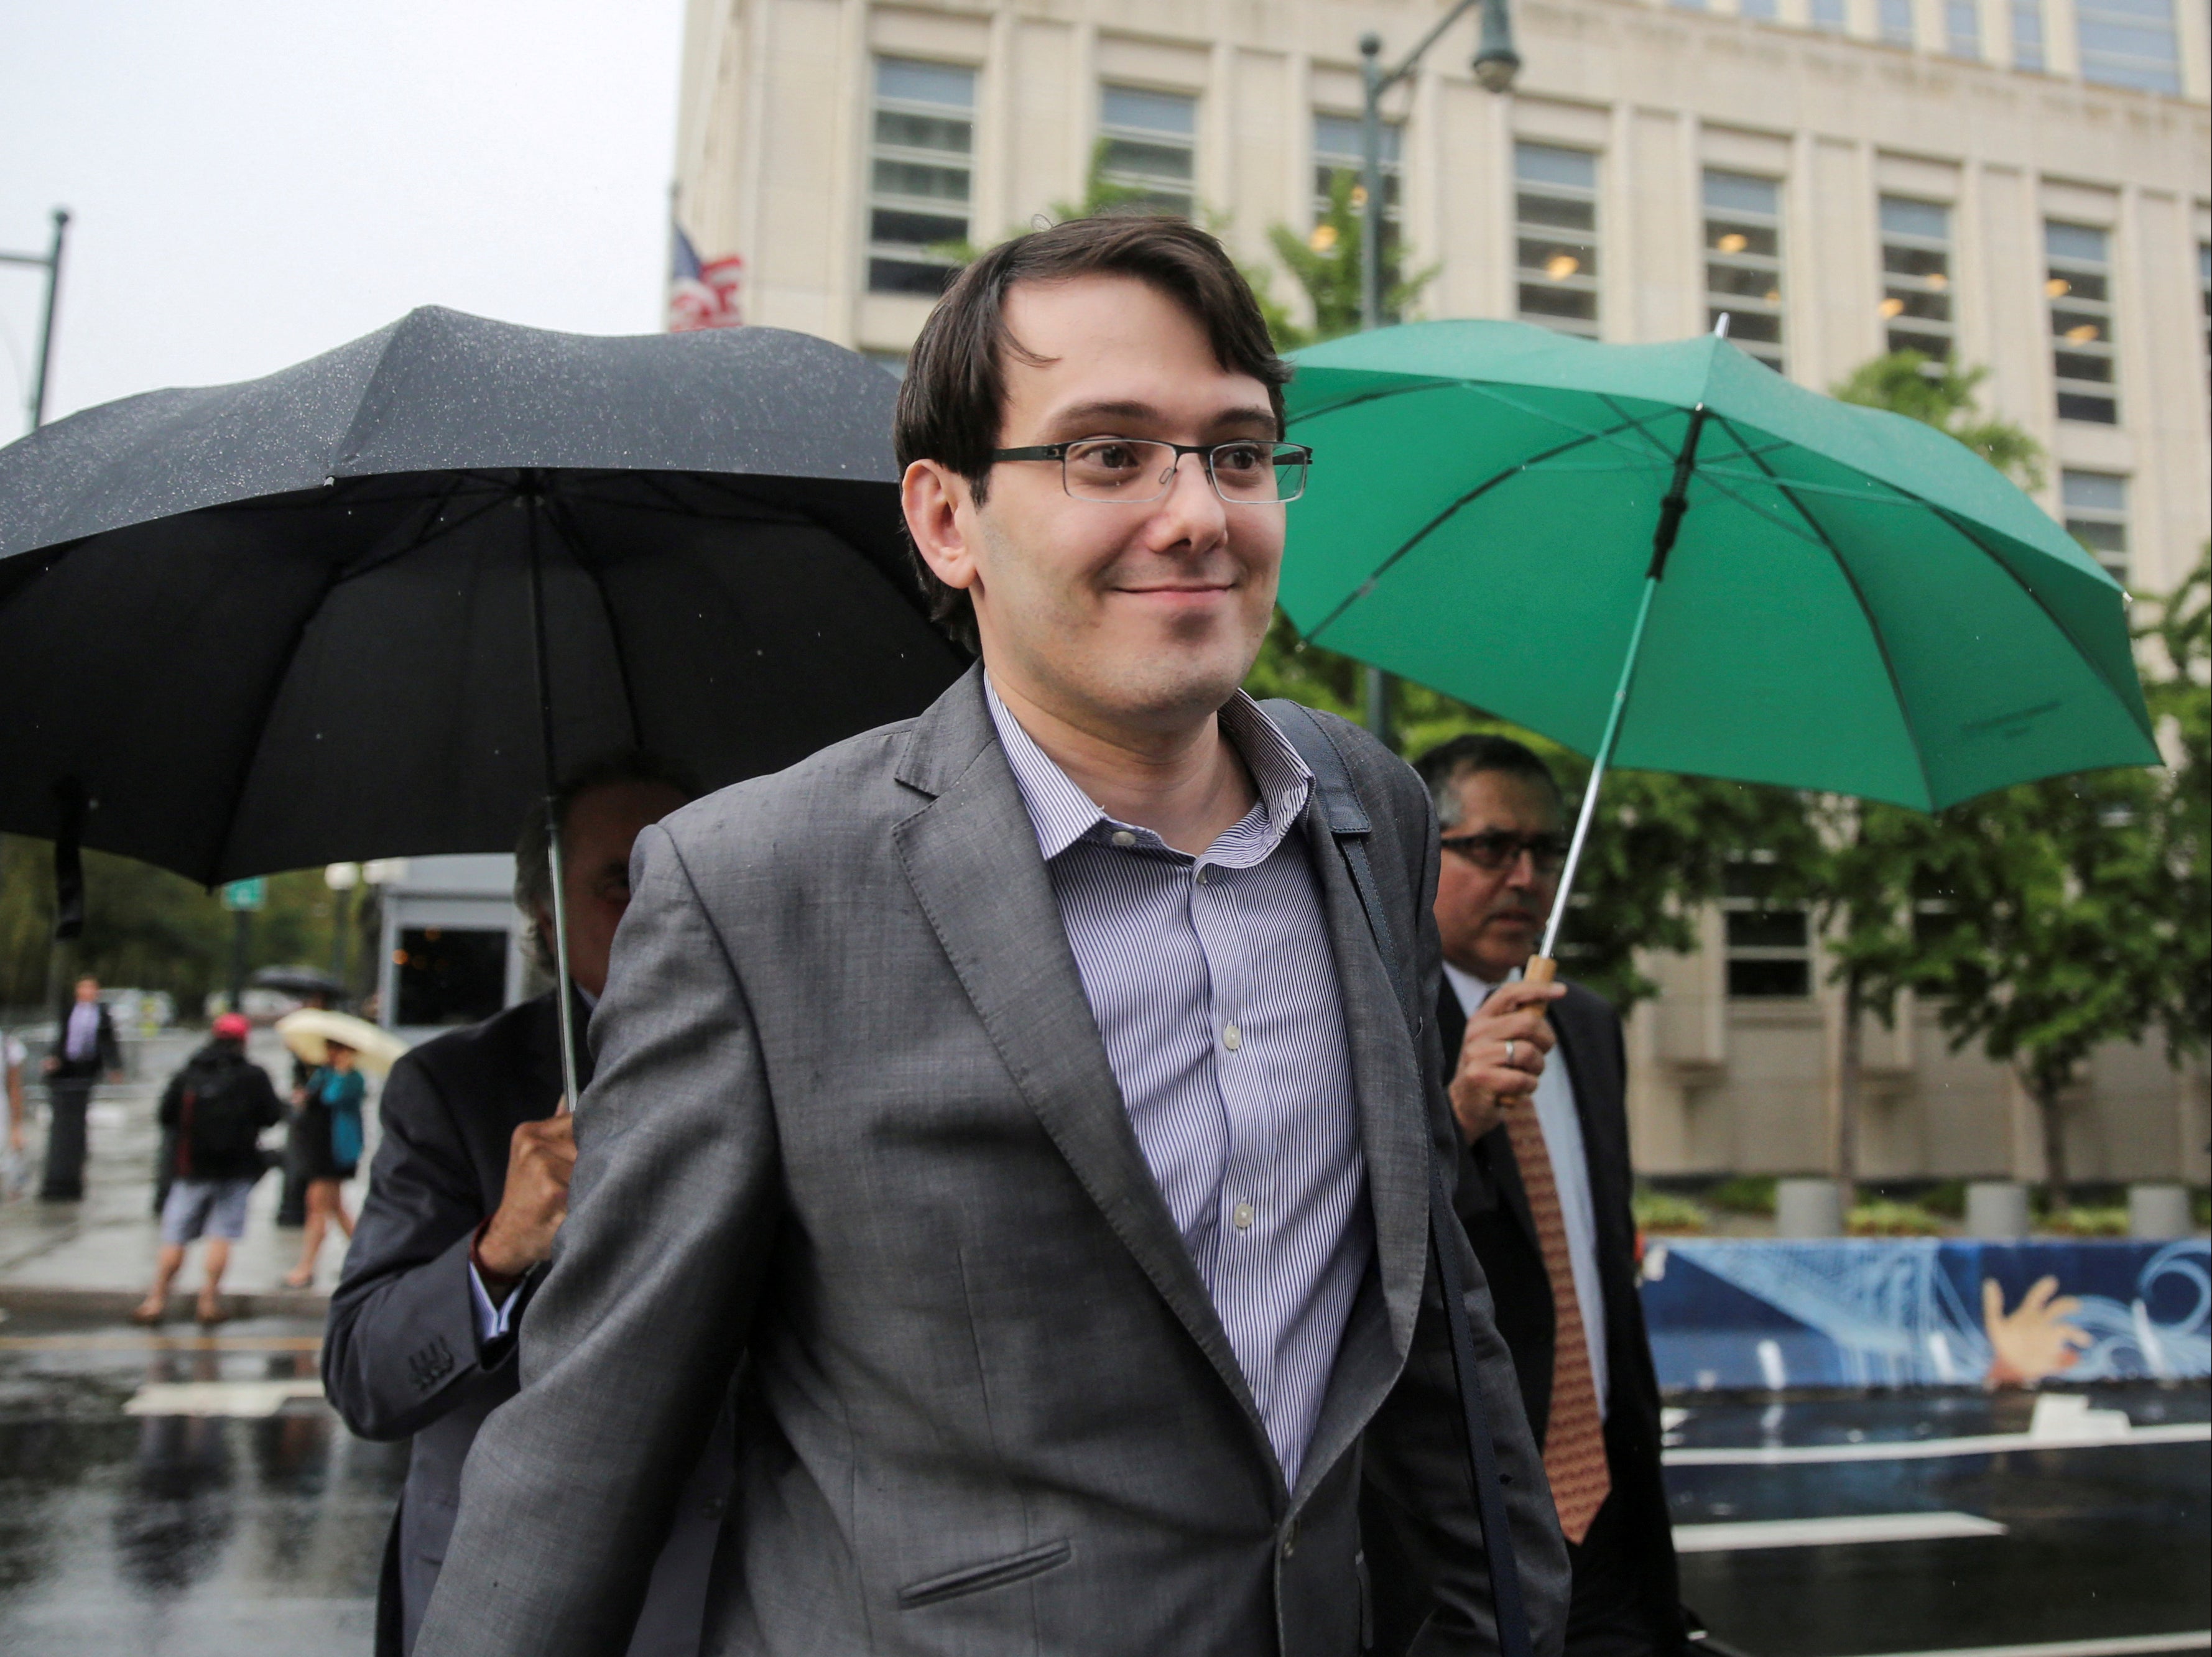 Martin Shkreli leaves court during his fraud trial in August 2017